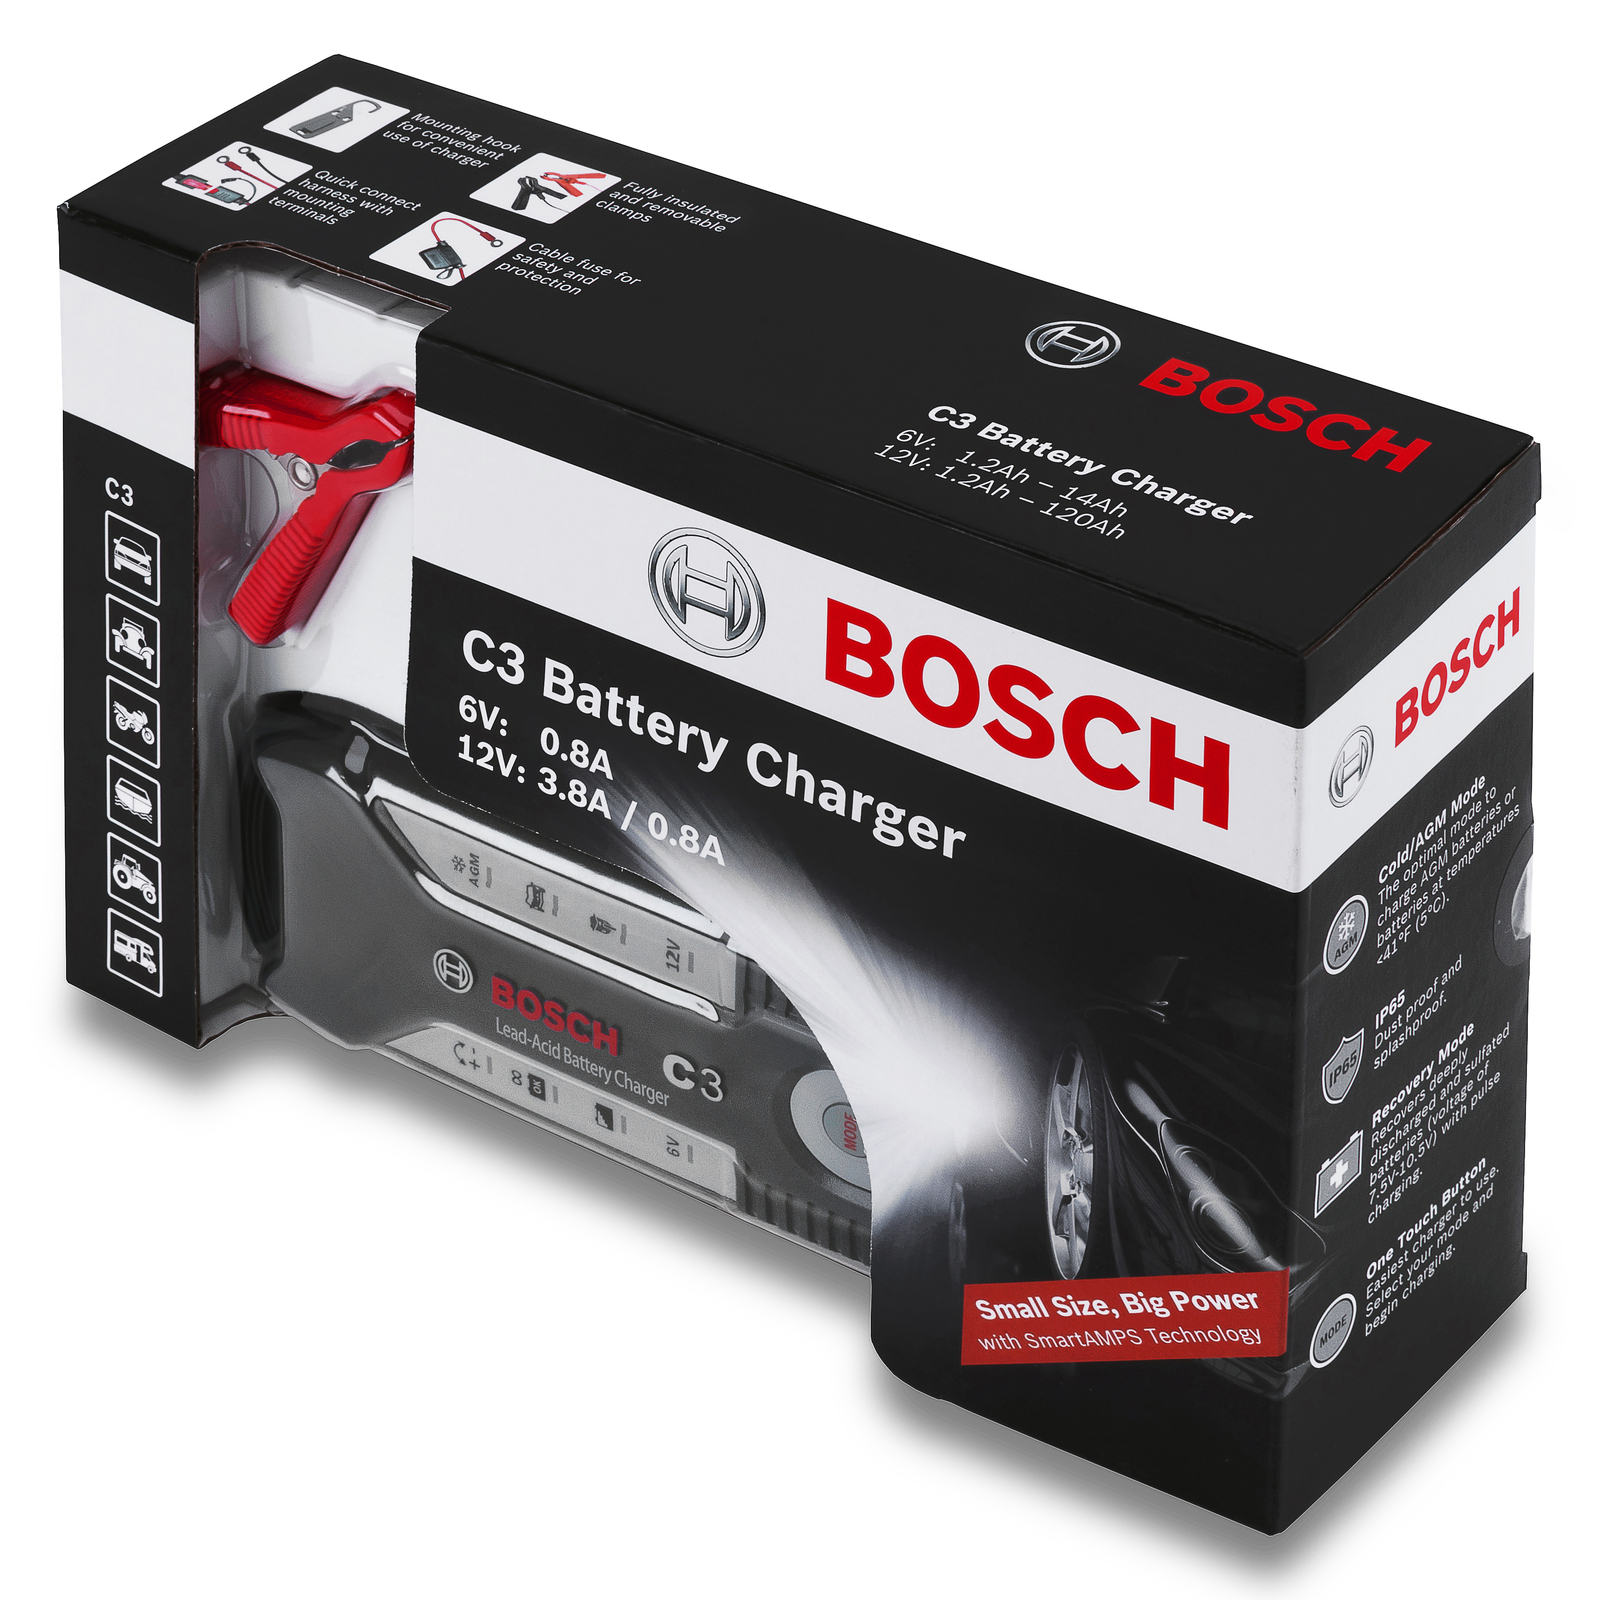 BOSCH 018999903MKM1 C3 Battery Charger for